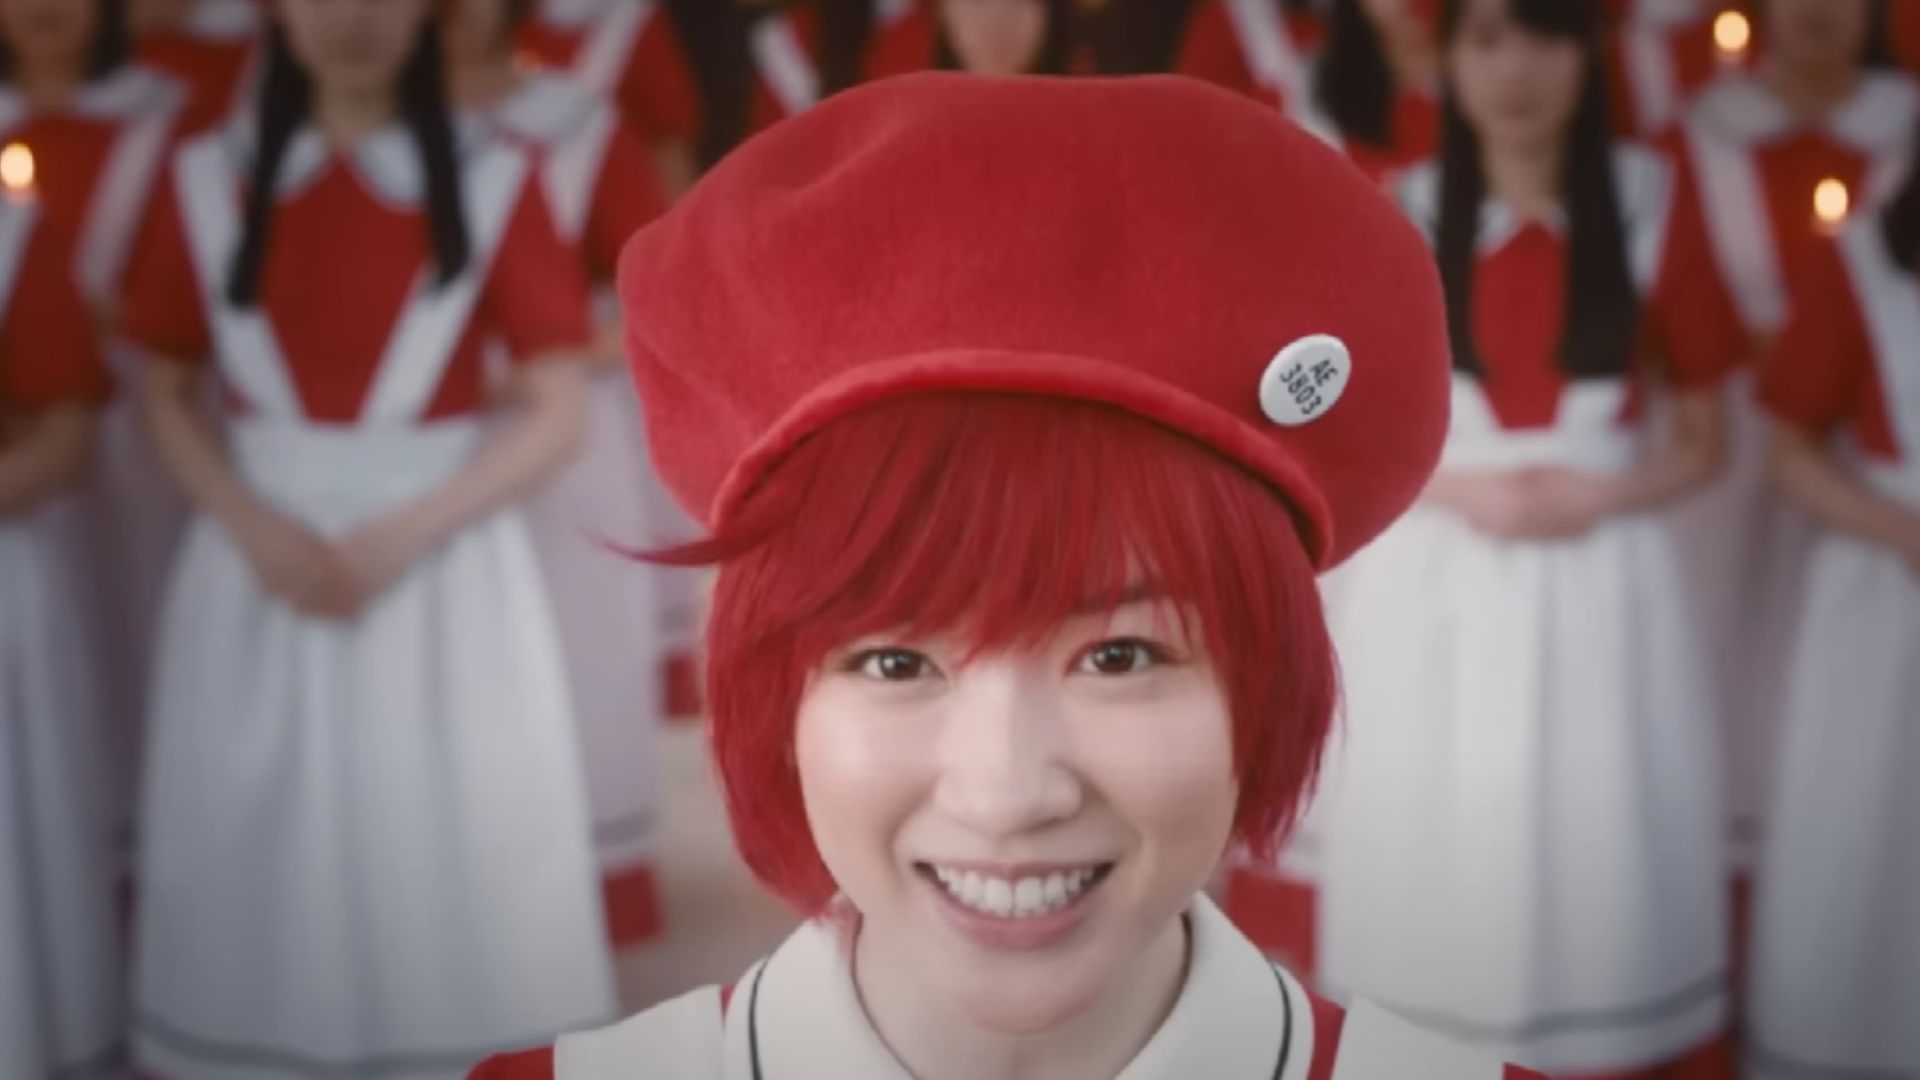 Cells at Work! Live-Action Film